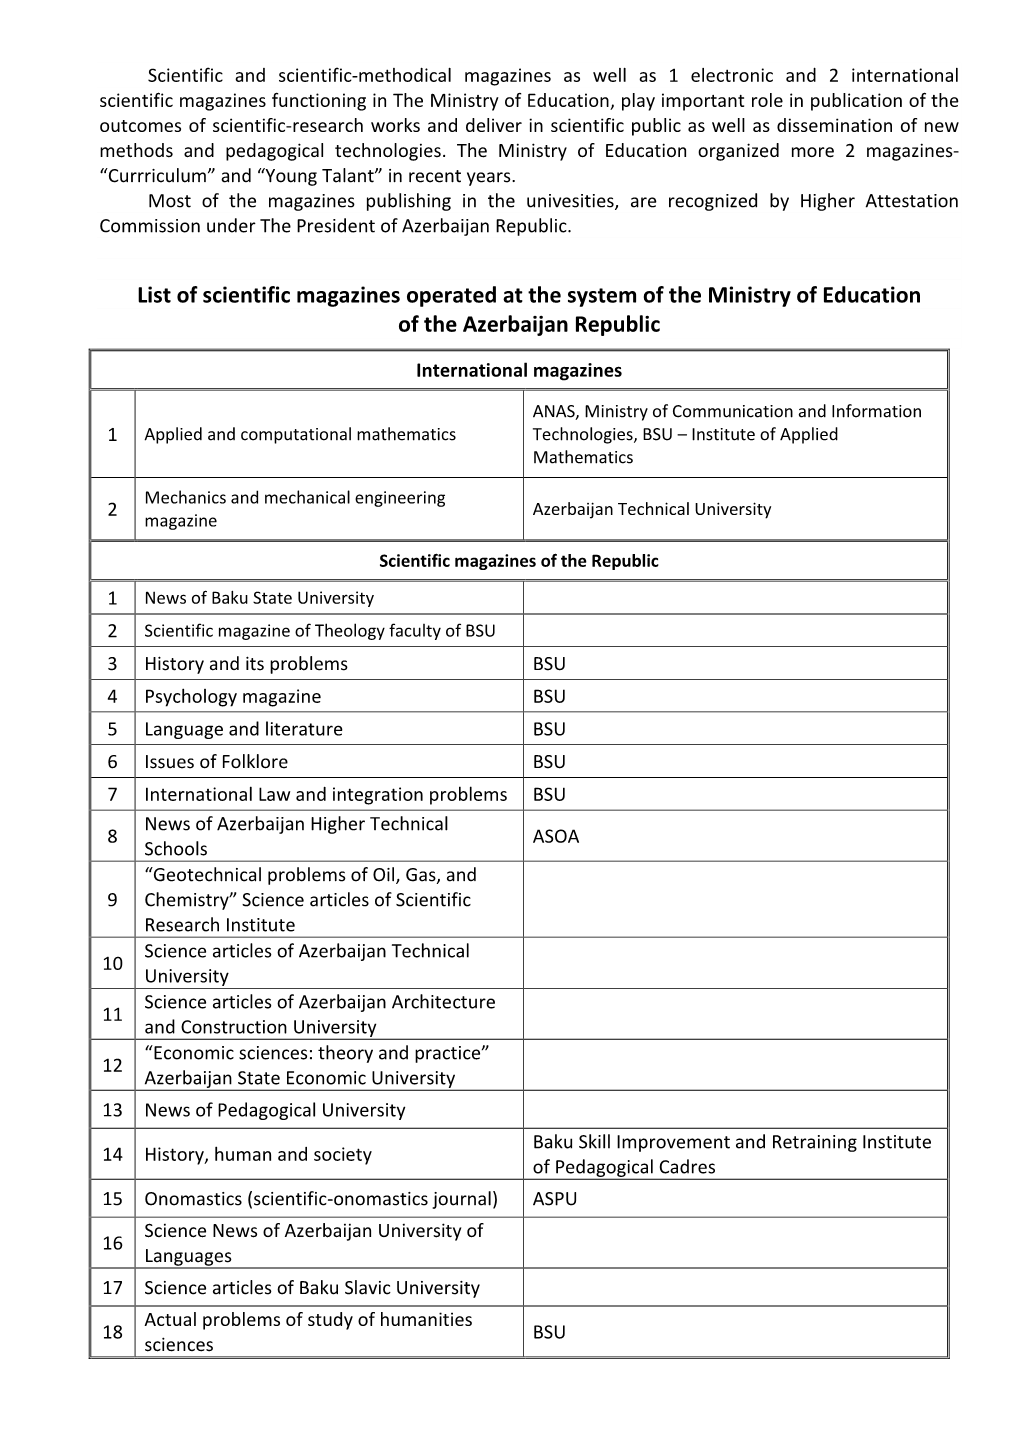 List of Scientific Magazines Operated at the System of the Ministry of Education of the Azerbaijan Republic